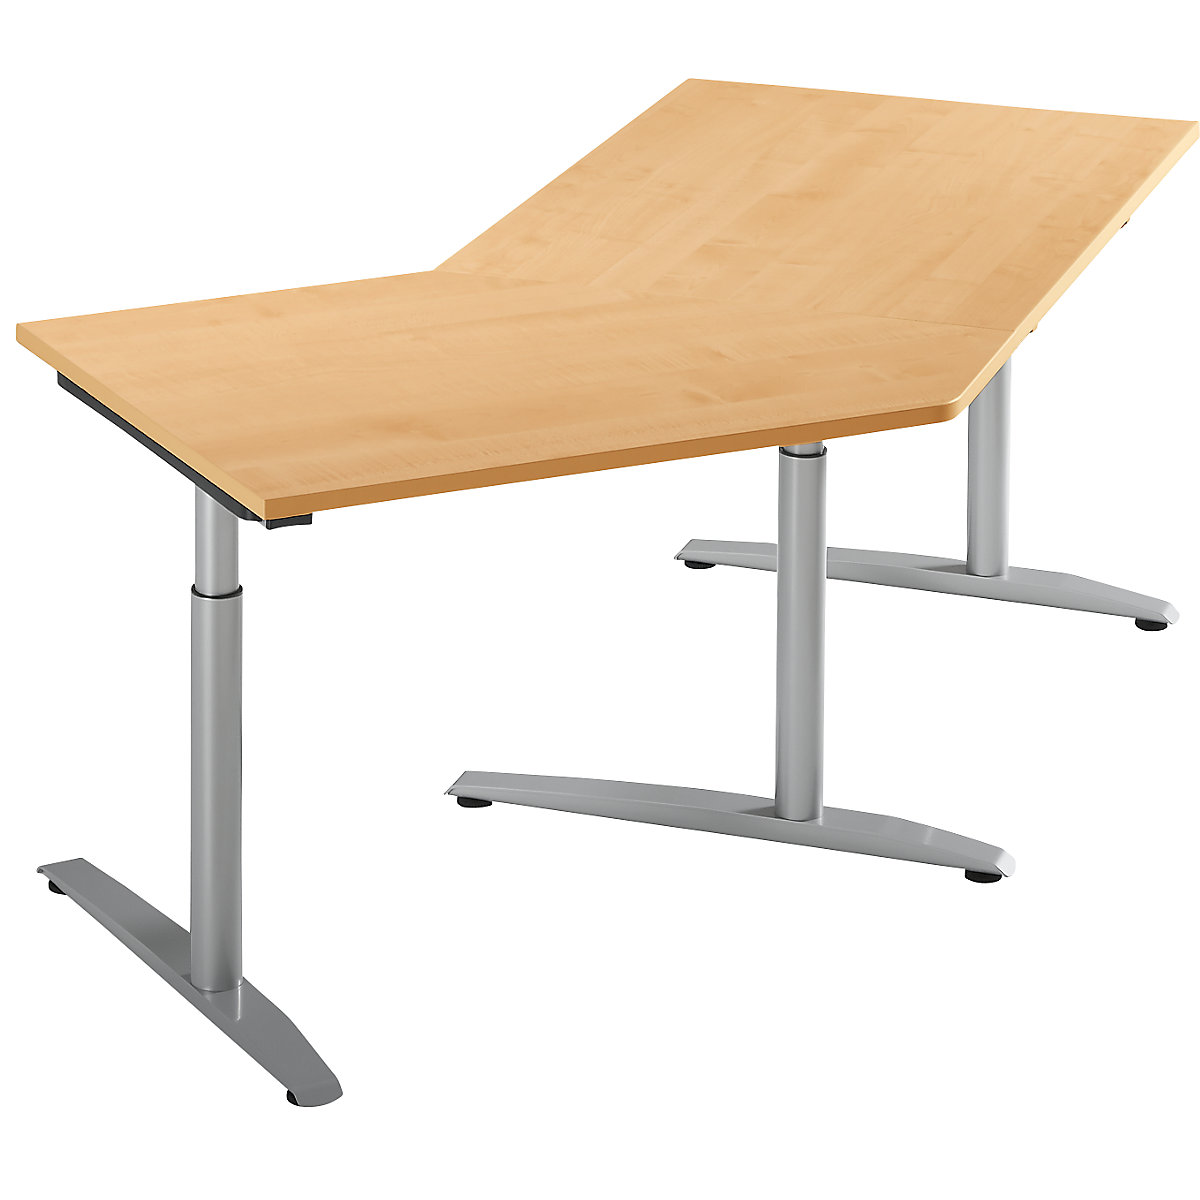 Add-on table, height adjustable from 650 – 850 mm HANNA